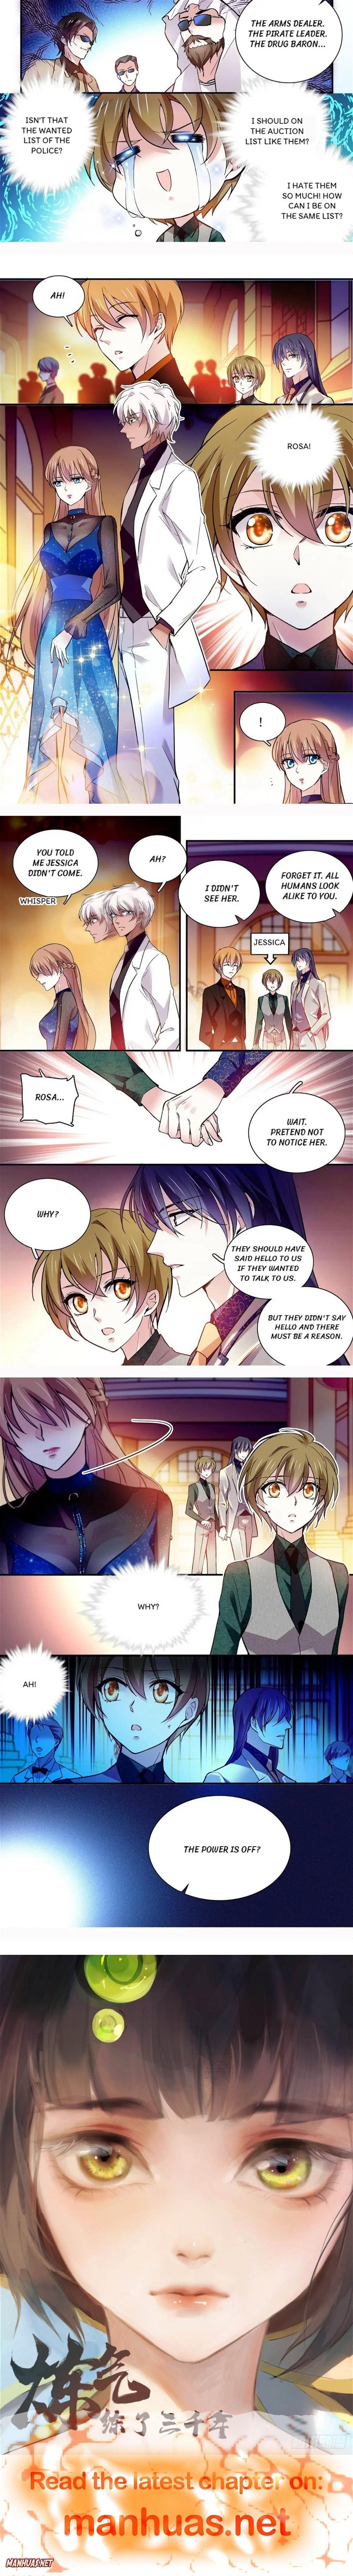 My Love Story - Page 2